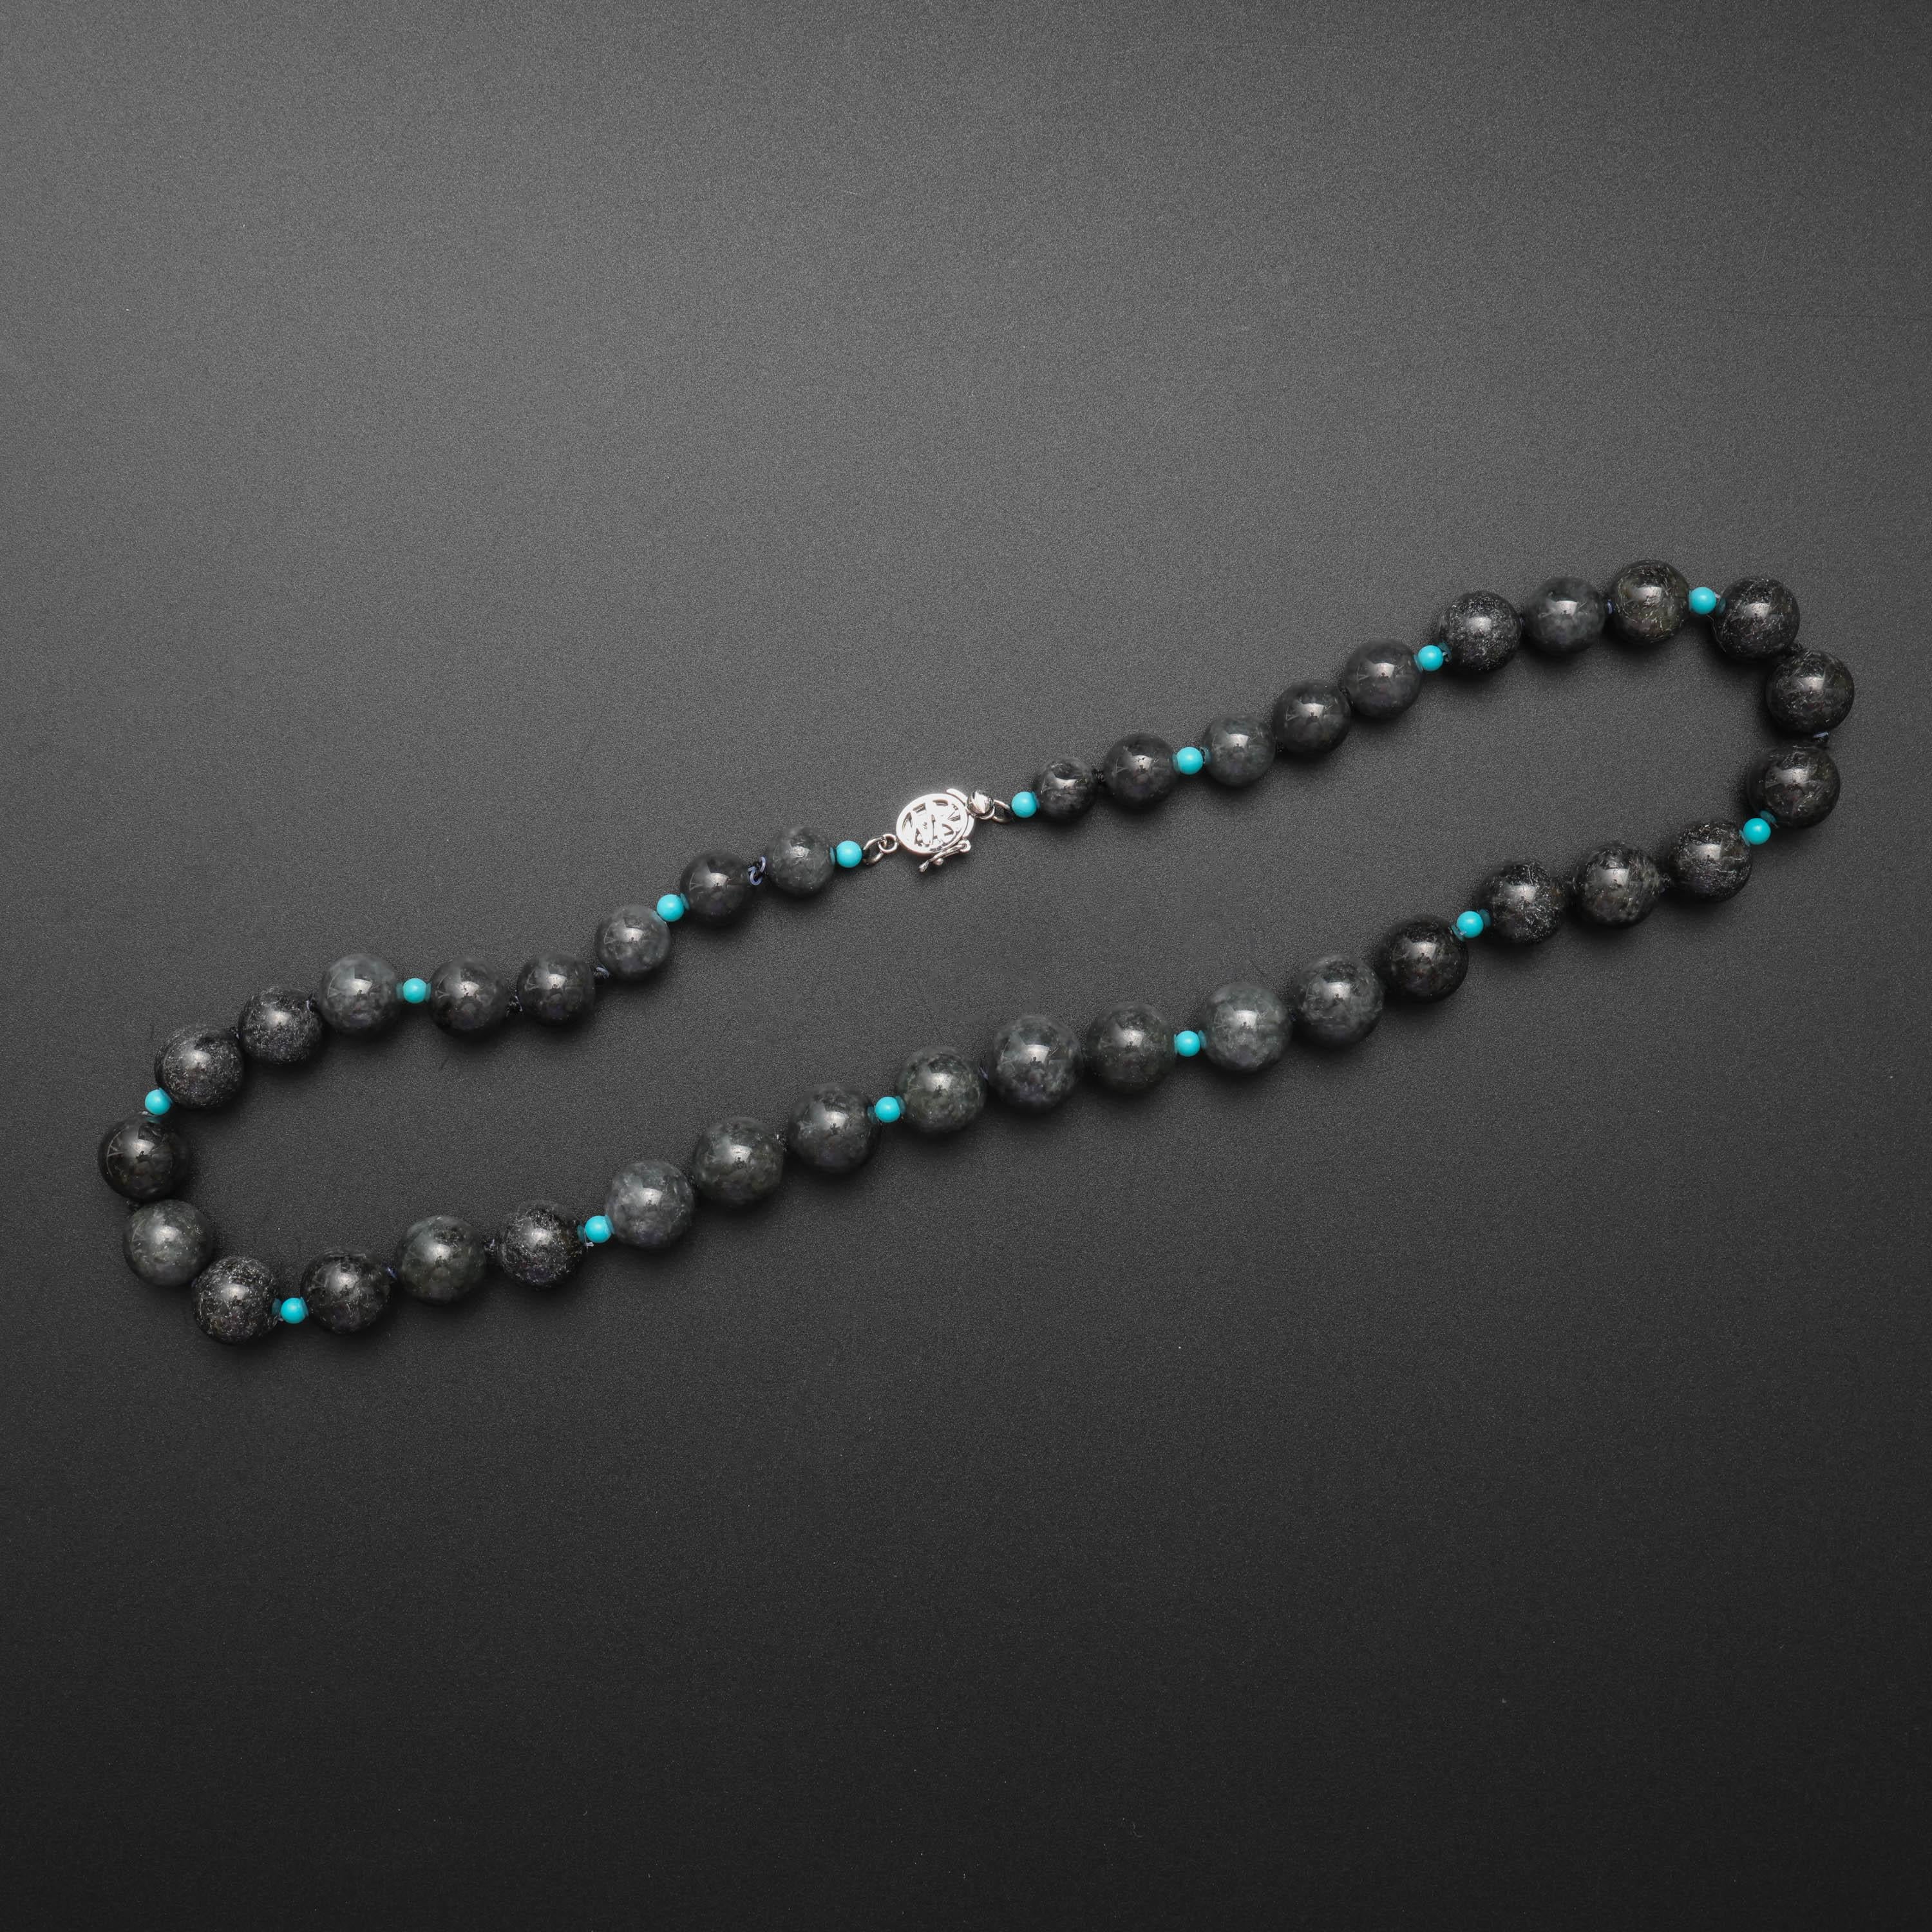 Artisan Black Jade Necklace with Turquoise Accent Beads Certified Untreated Jadeite Jade For Sale